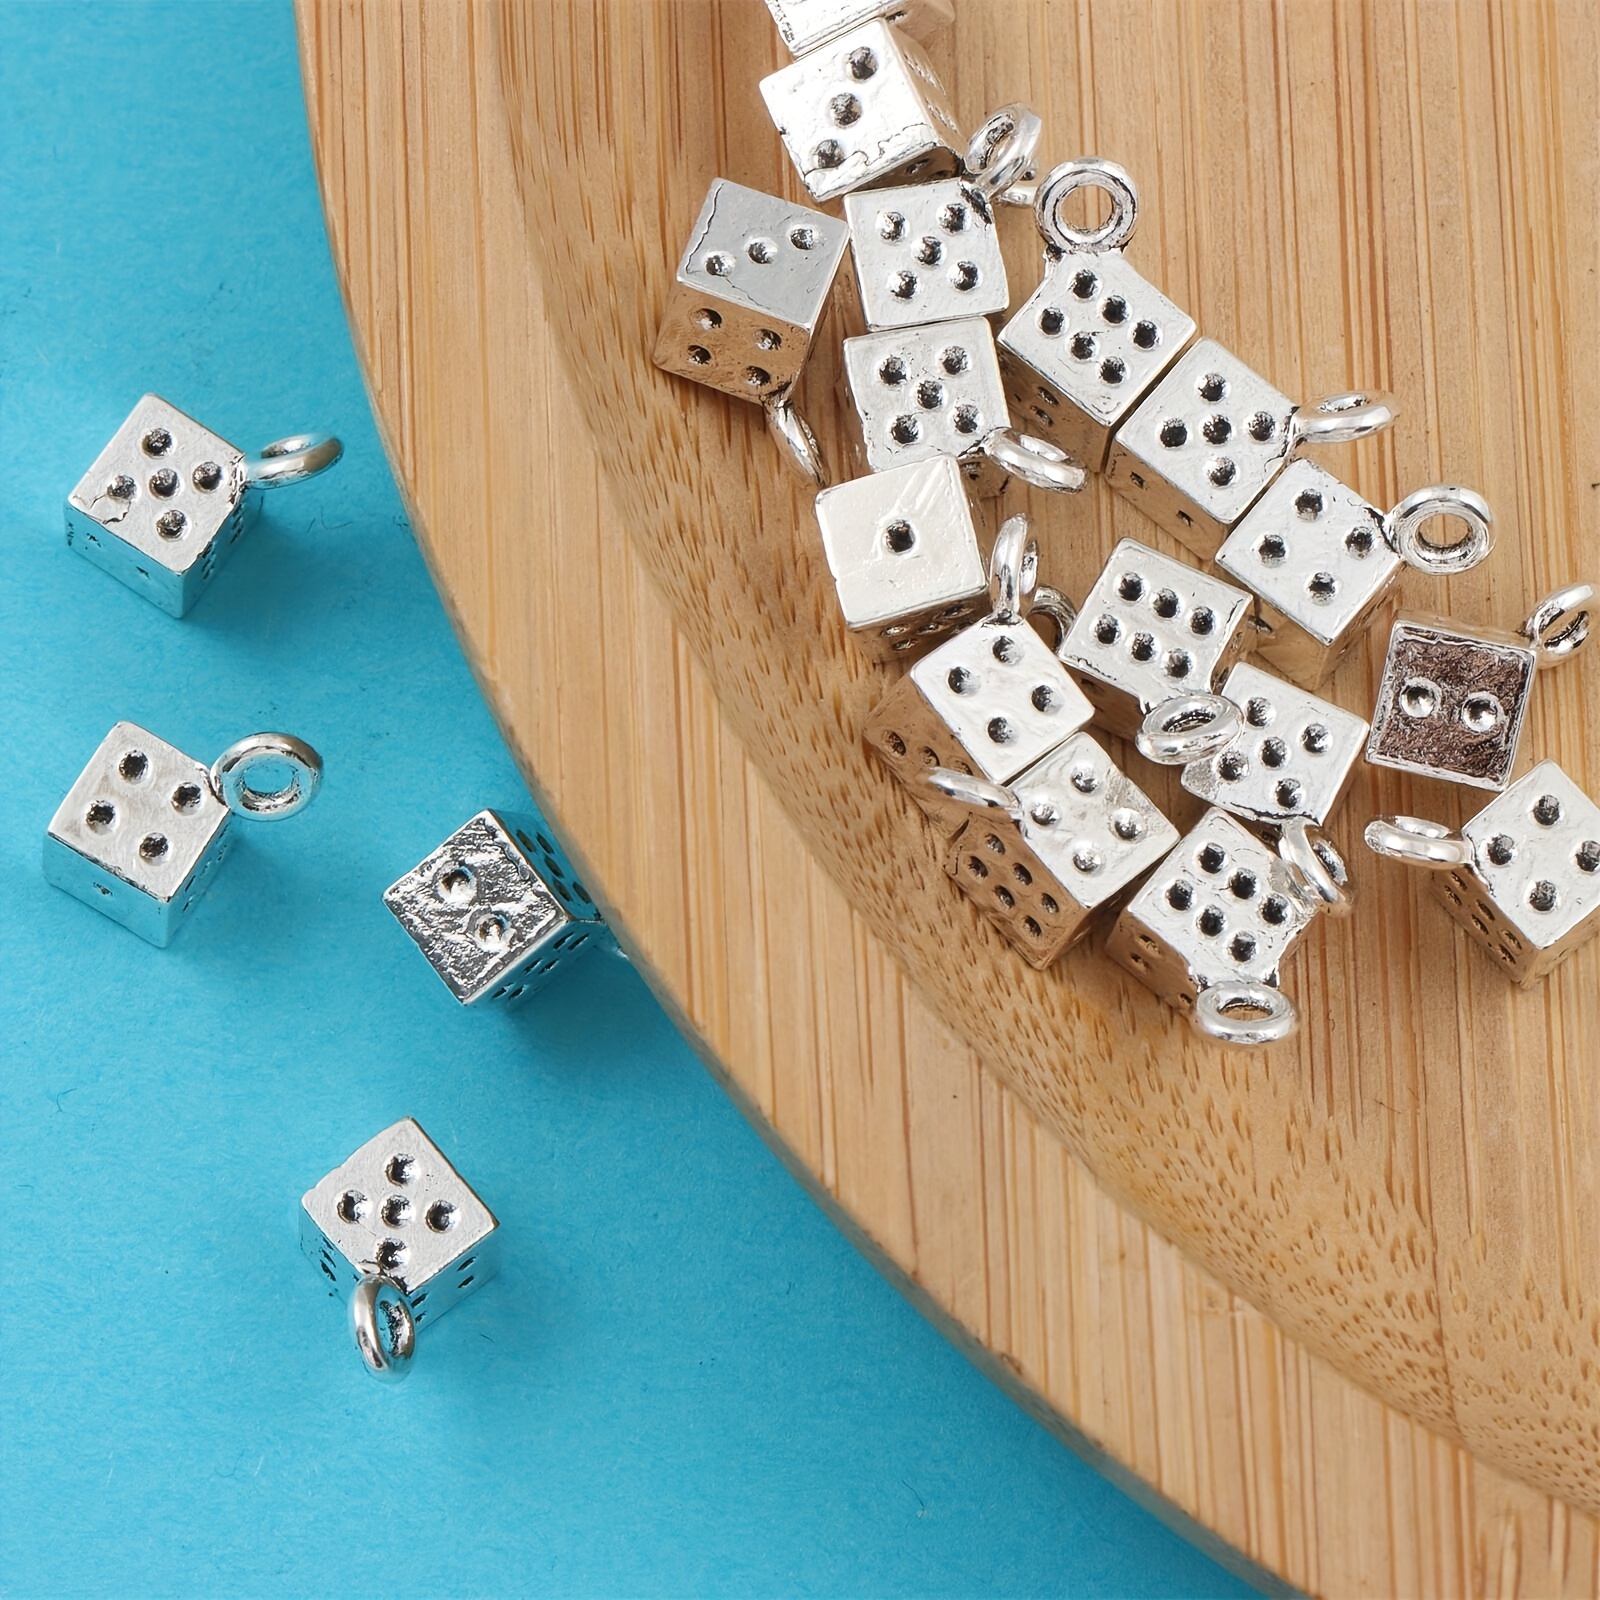 

20pcs Silver Plated Dice Pendant Vintage Square Dice Charms For Bracelet Jewelry Making Diy Handmade Craft 10x5mm